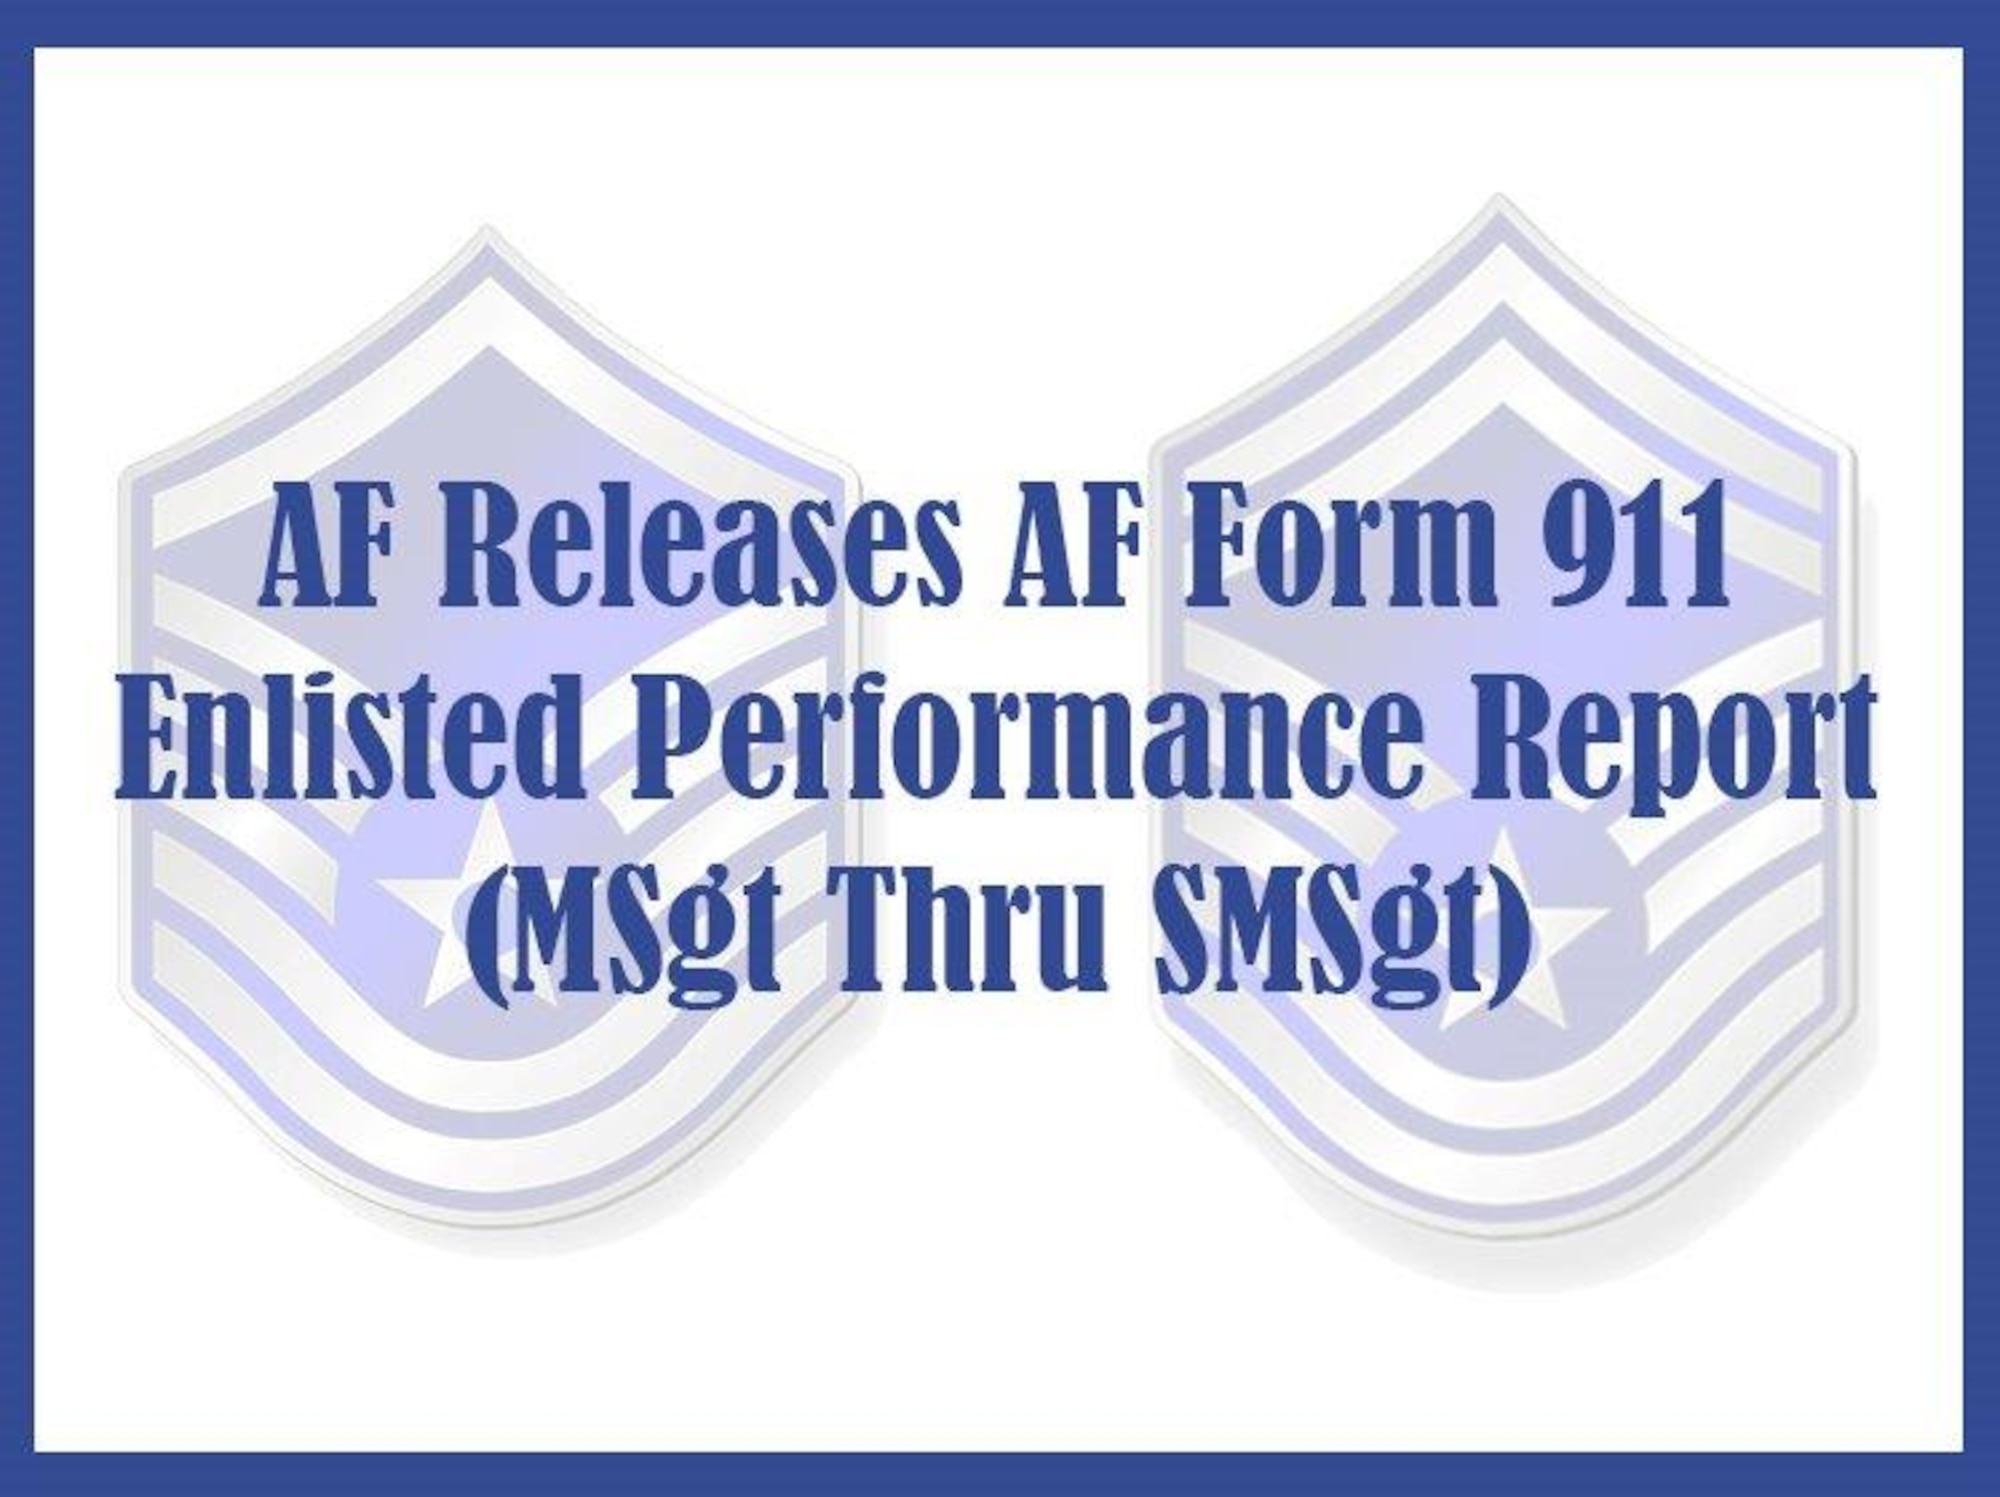 Senior master sergeant enlisted performance reports, which close out July 31, will be accomplished on the newly published Air Force Form 911, Enlisted Evaluation Report (MSgt Thru SMSgt), available July 31 on the ePublishing website. (U.S. Air Force graphic by Shelly Petruska)